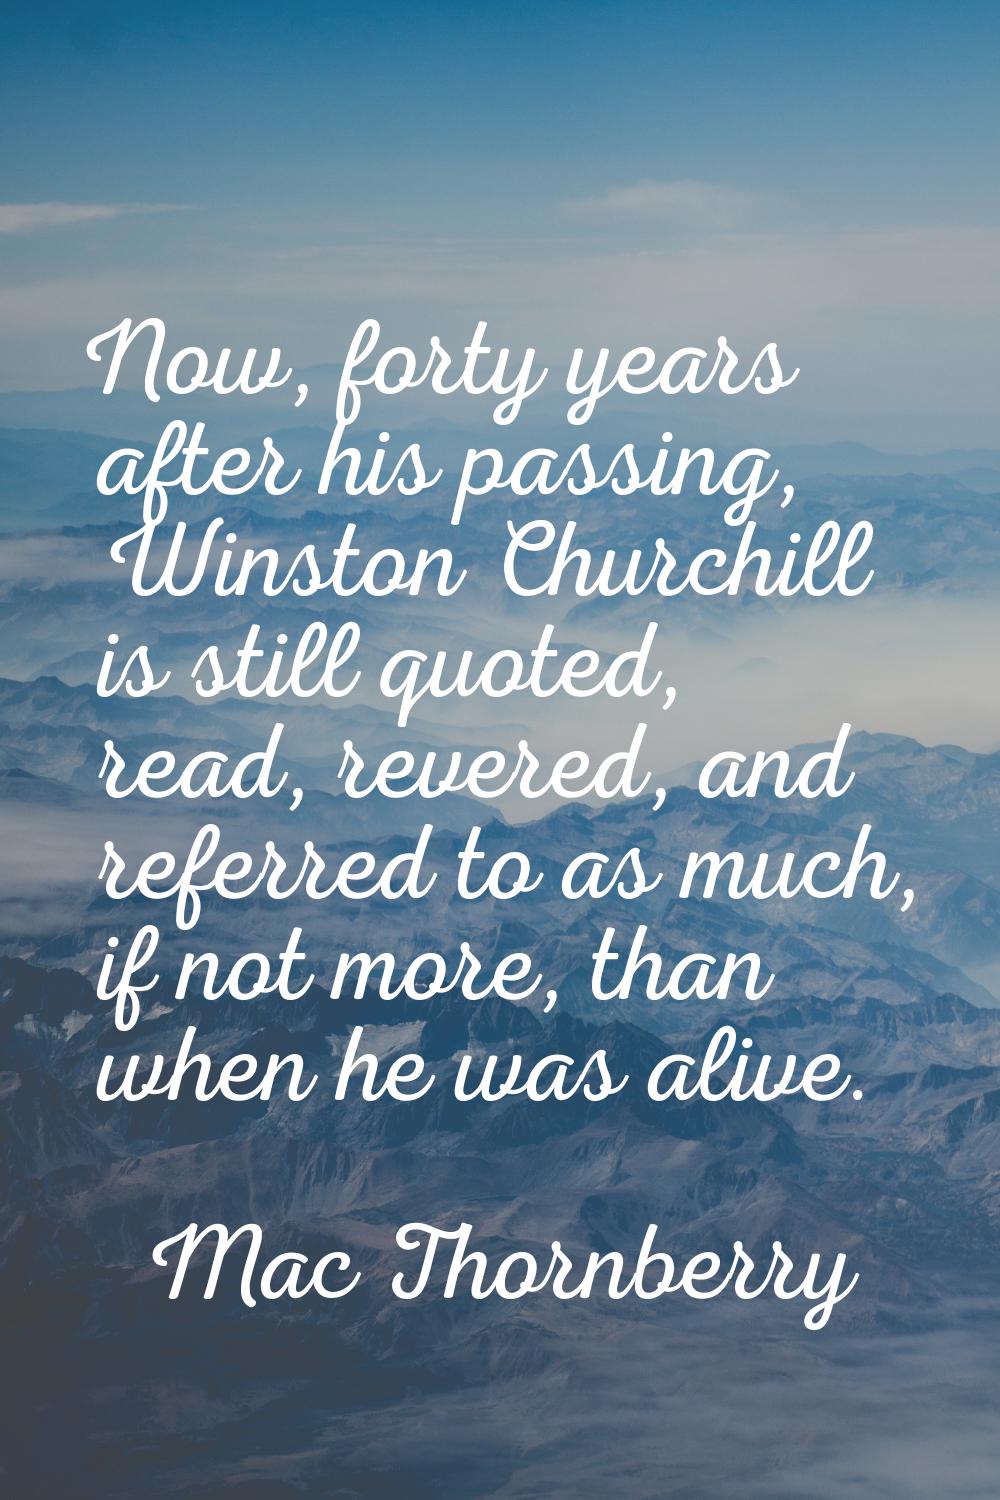 Now, forty years after his passing, Winston Churchill is still quoted, read, revered, and referred 